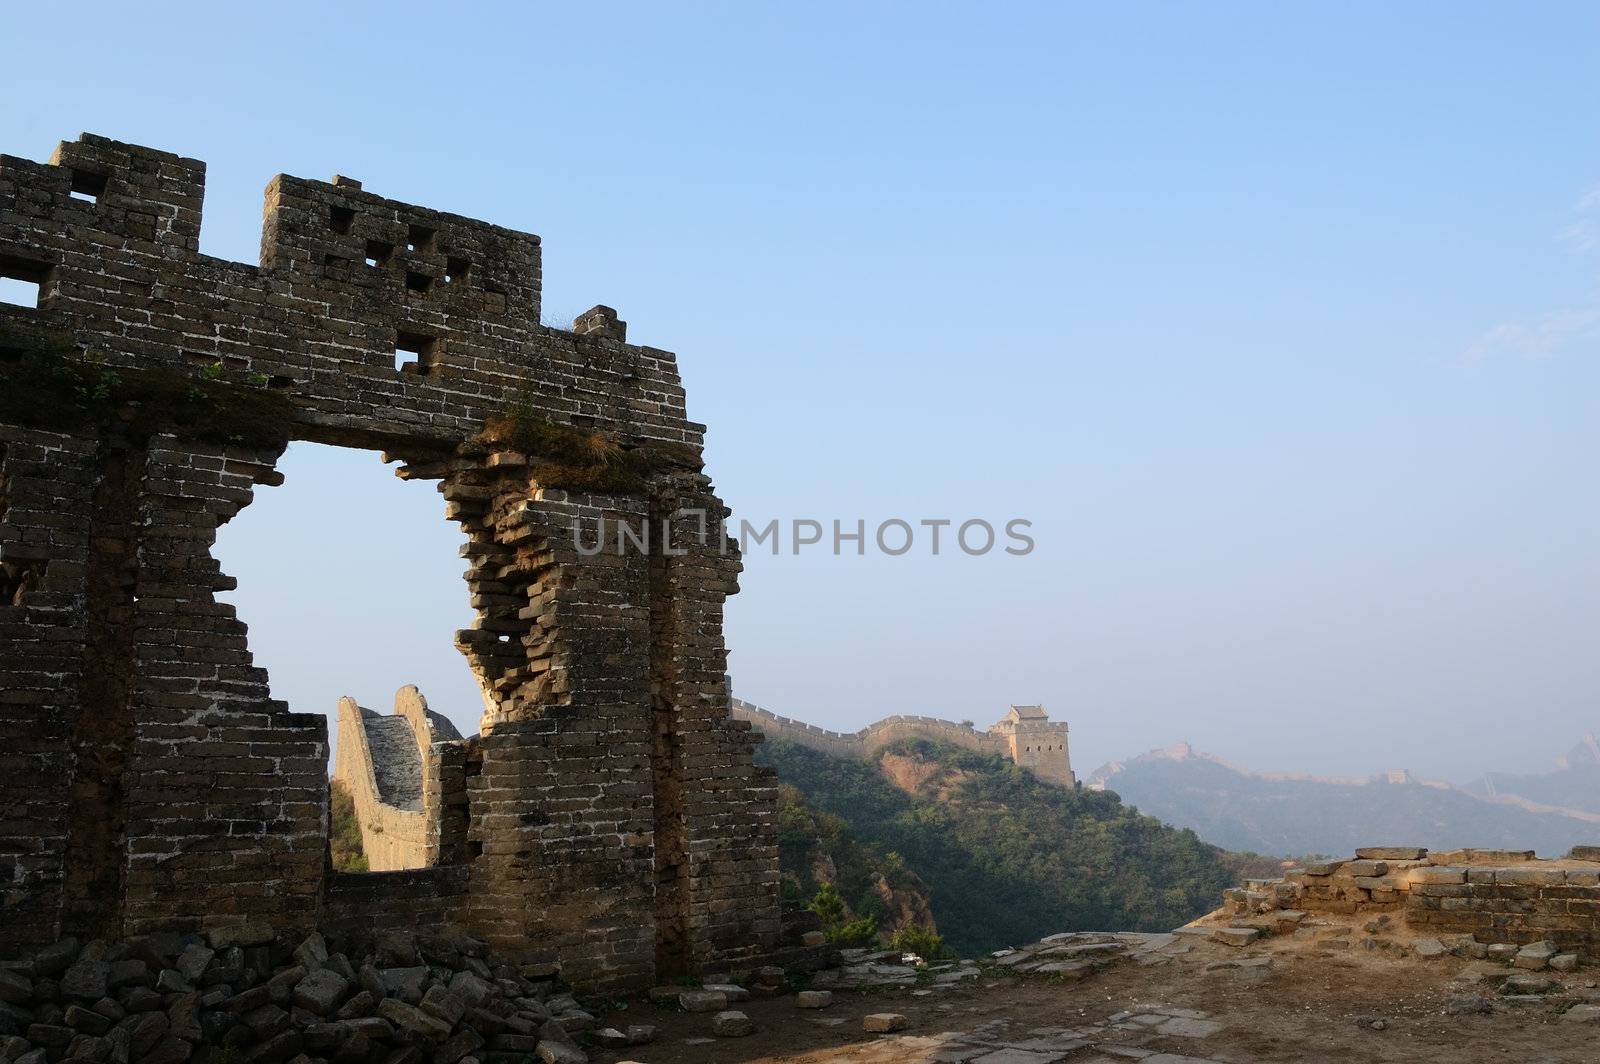 Dilapidated Great Wall of China in Jinshanling, Hebei Province, China